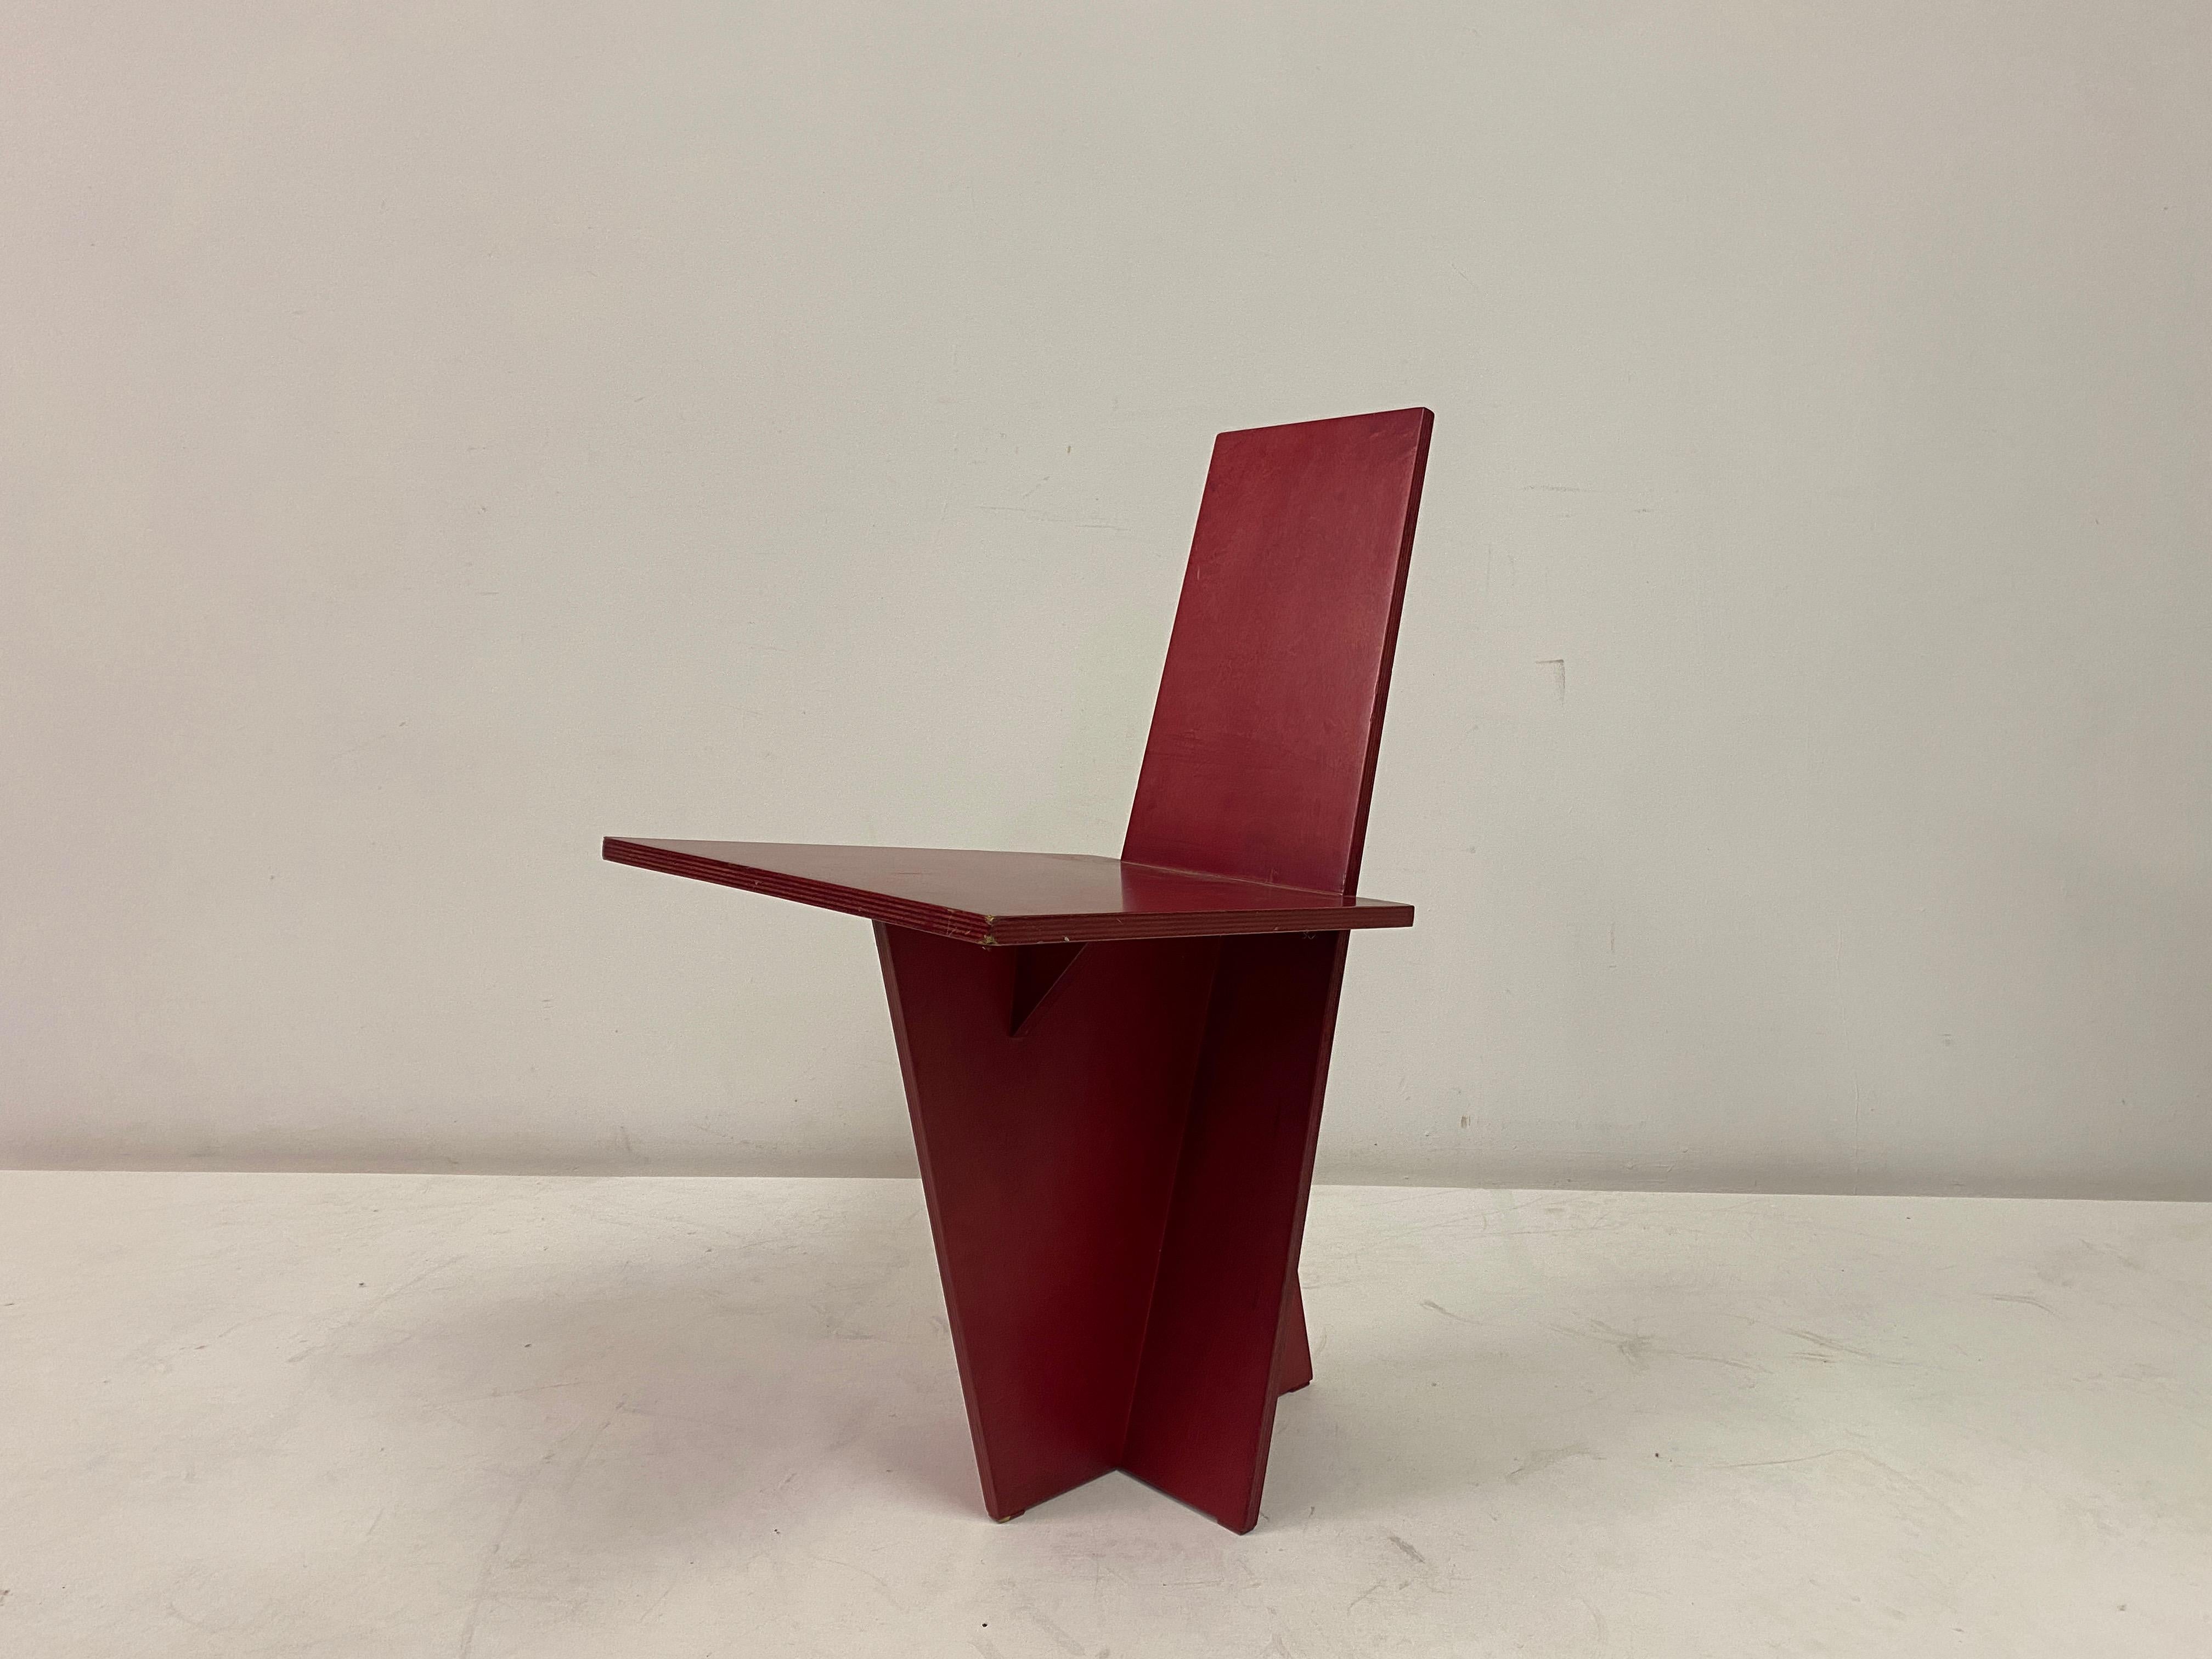 20th Century 1980s Red Modernist Plywood Chair For Sale